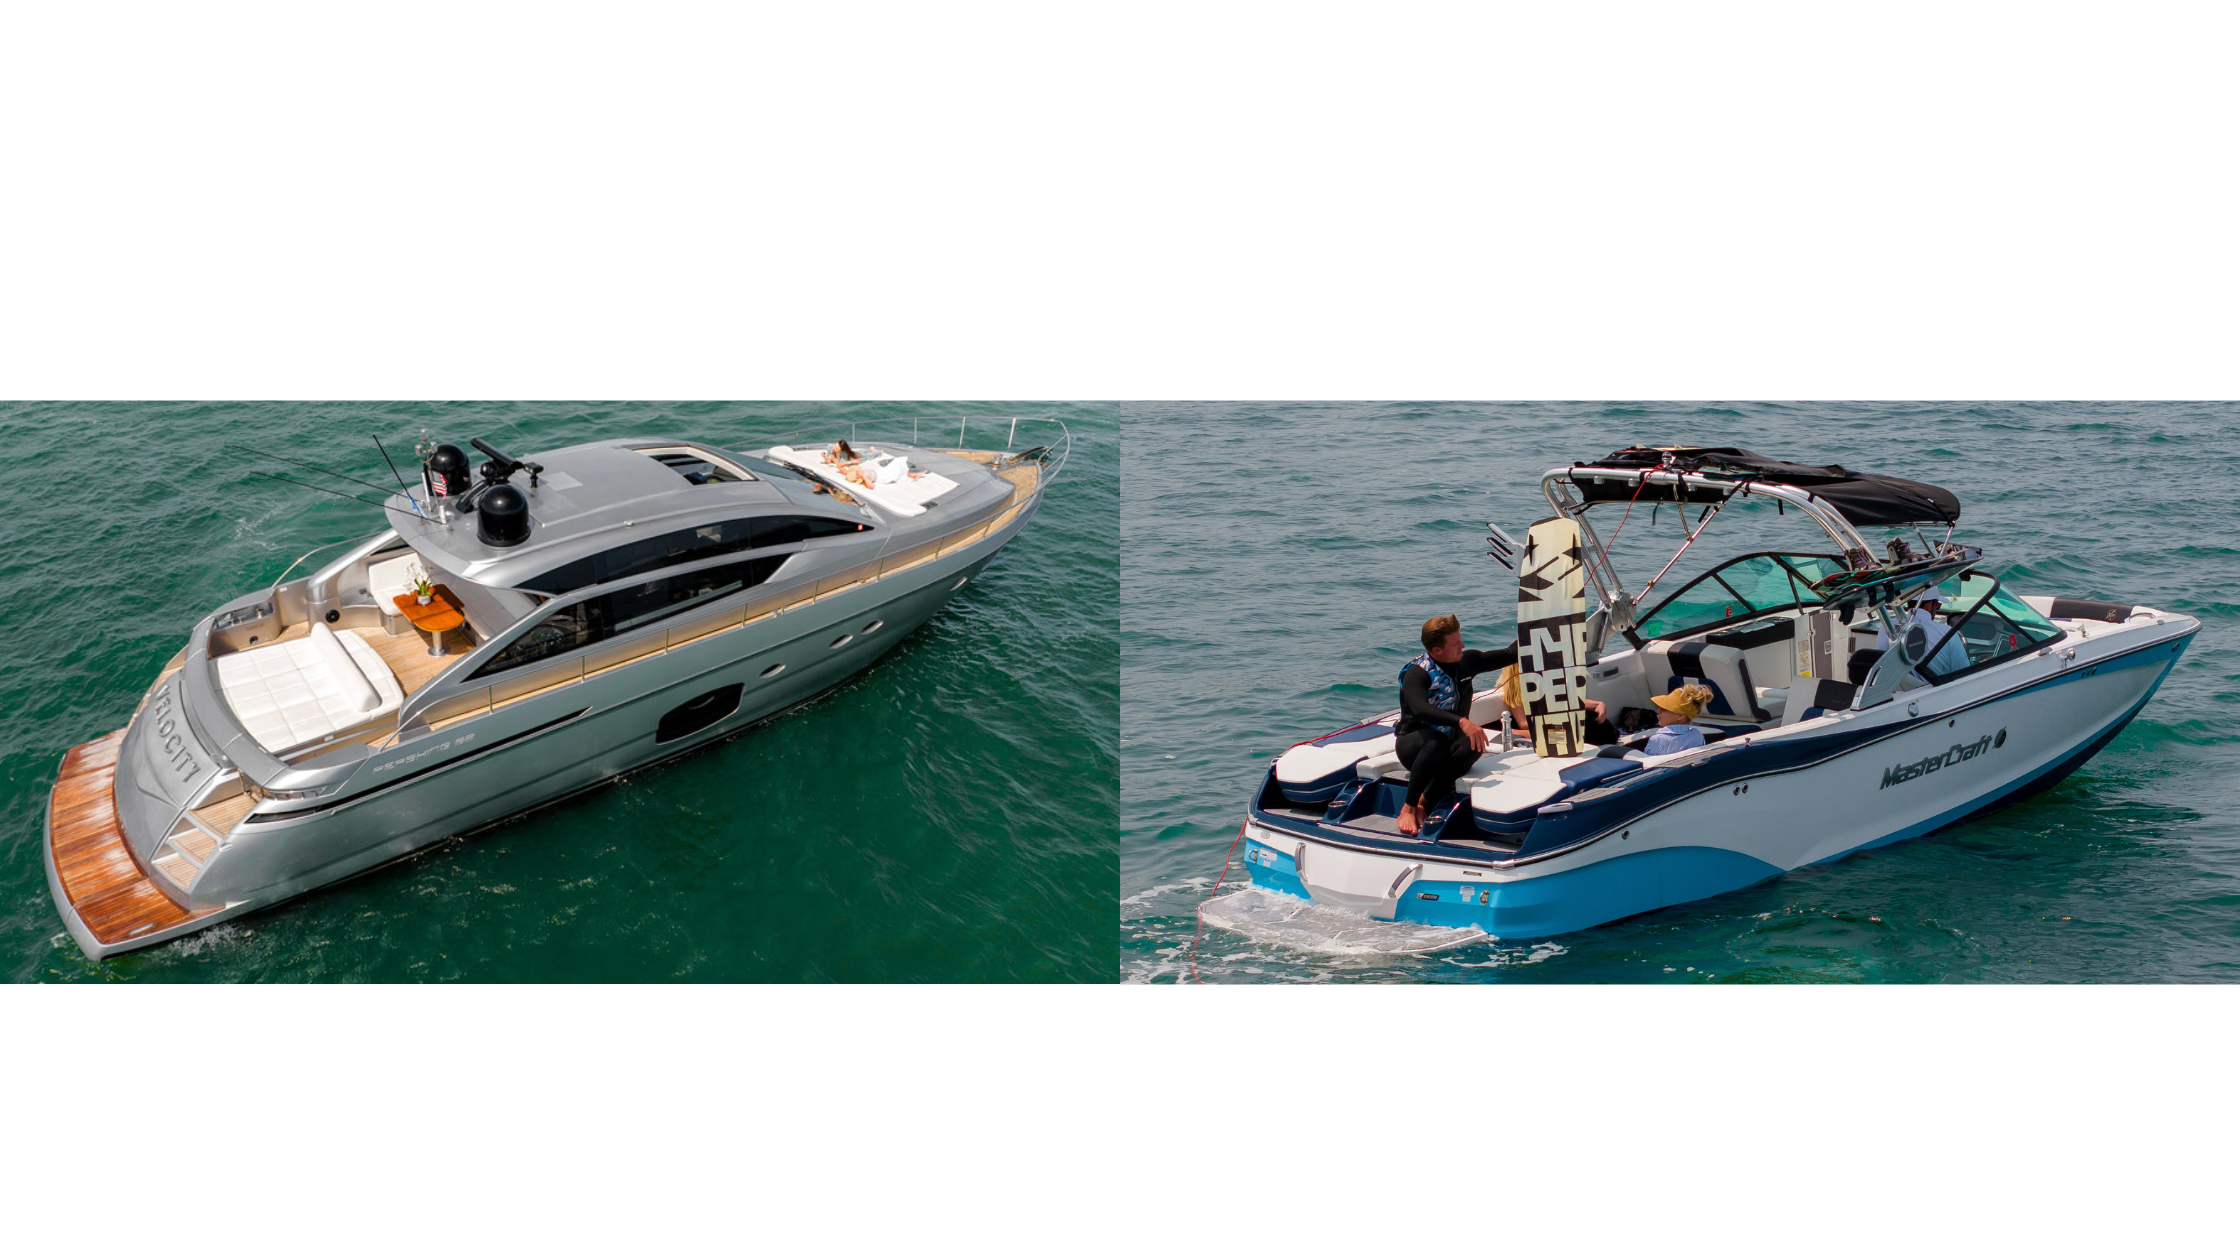 62' Pershing + Seabobs and 26' Mastercraft Tie-Up (25 Guests) Image 1